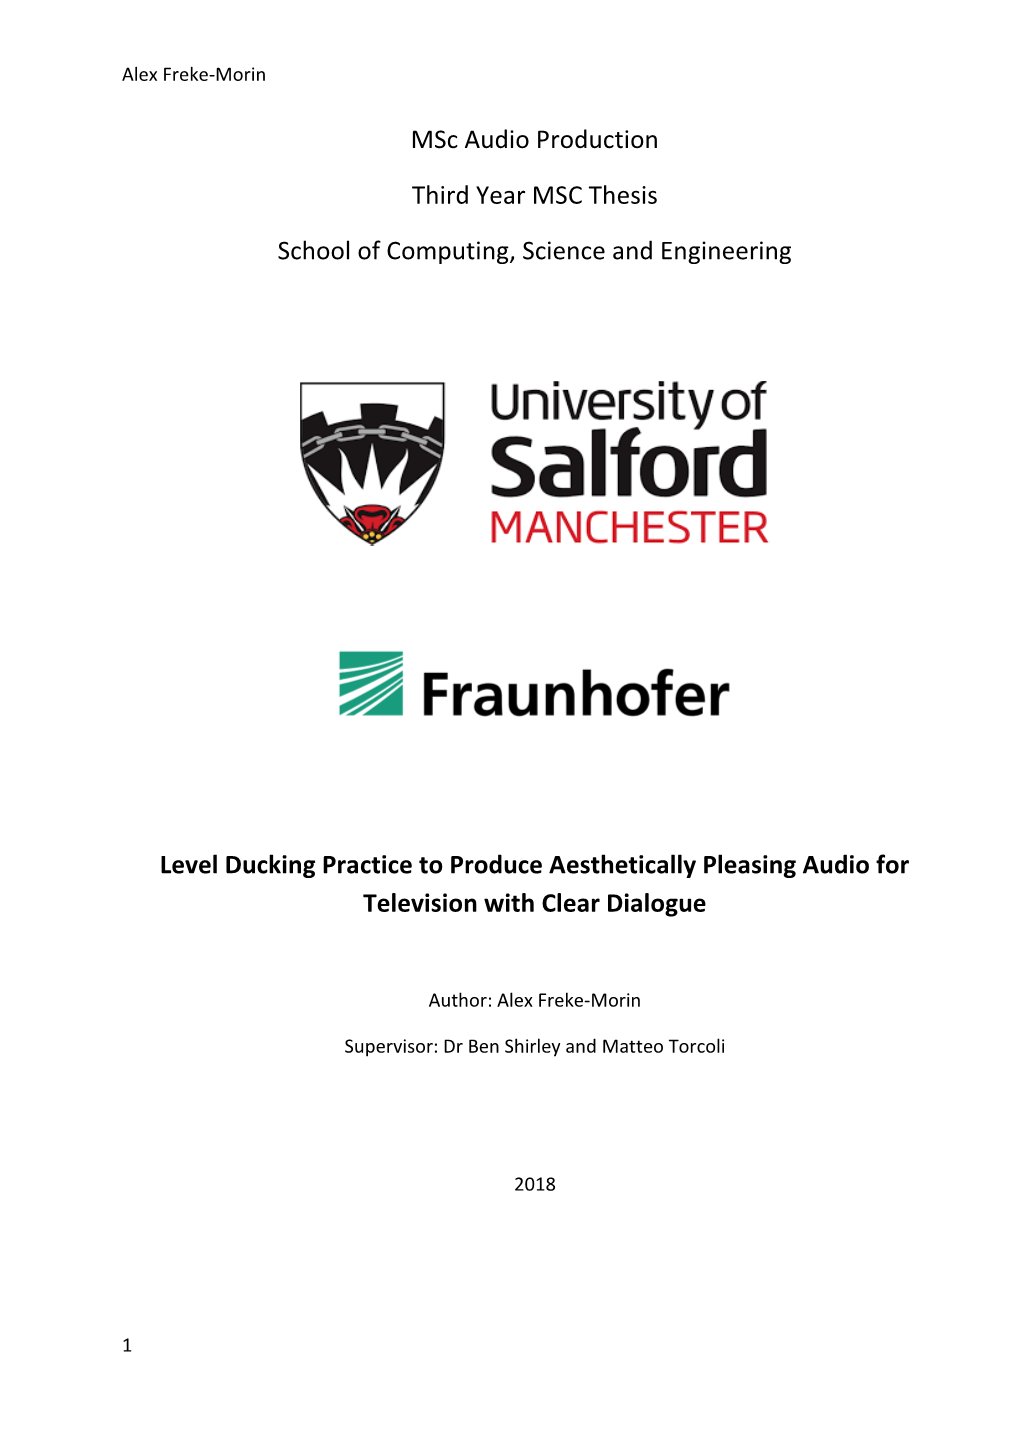 Msc Audio Production Third Year MSC Thesis School of Computing, Science and Engineering Level Ducking Practice to Produce Aesthe